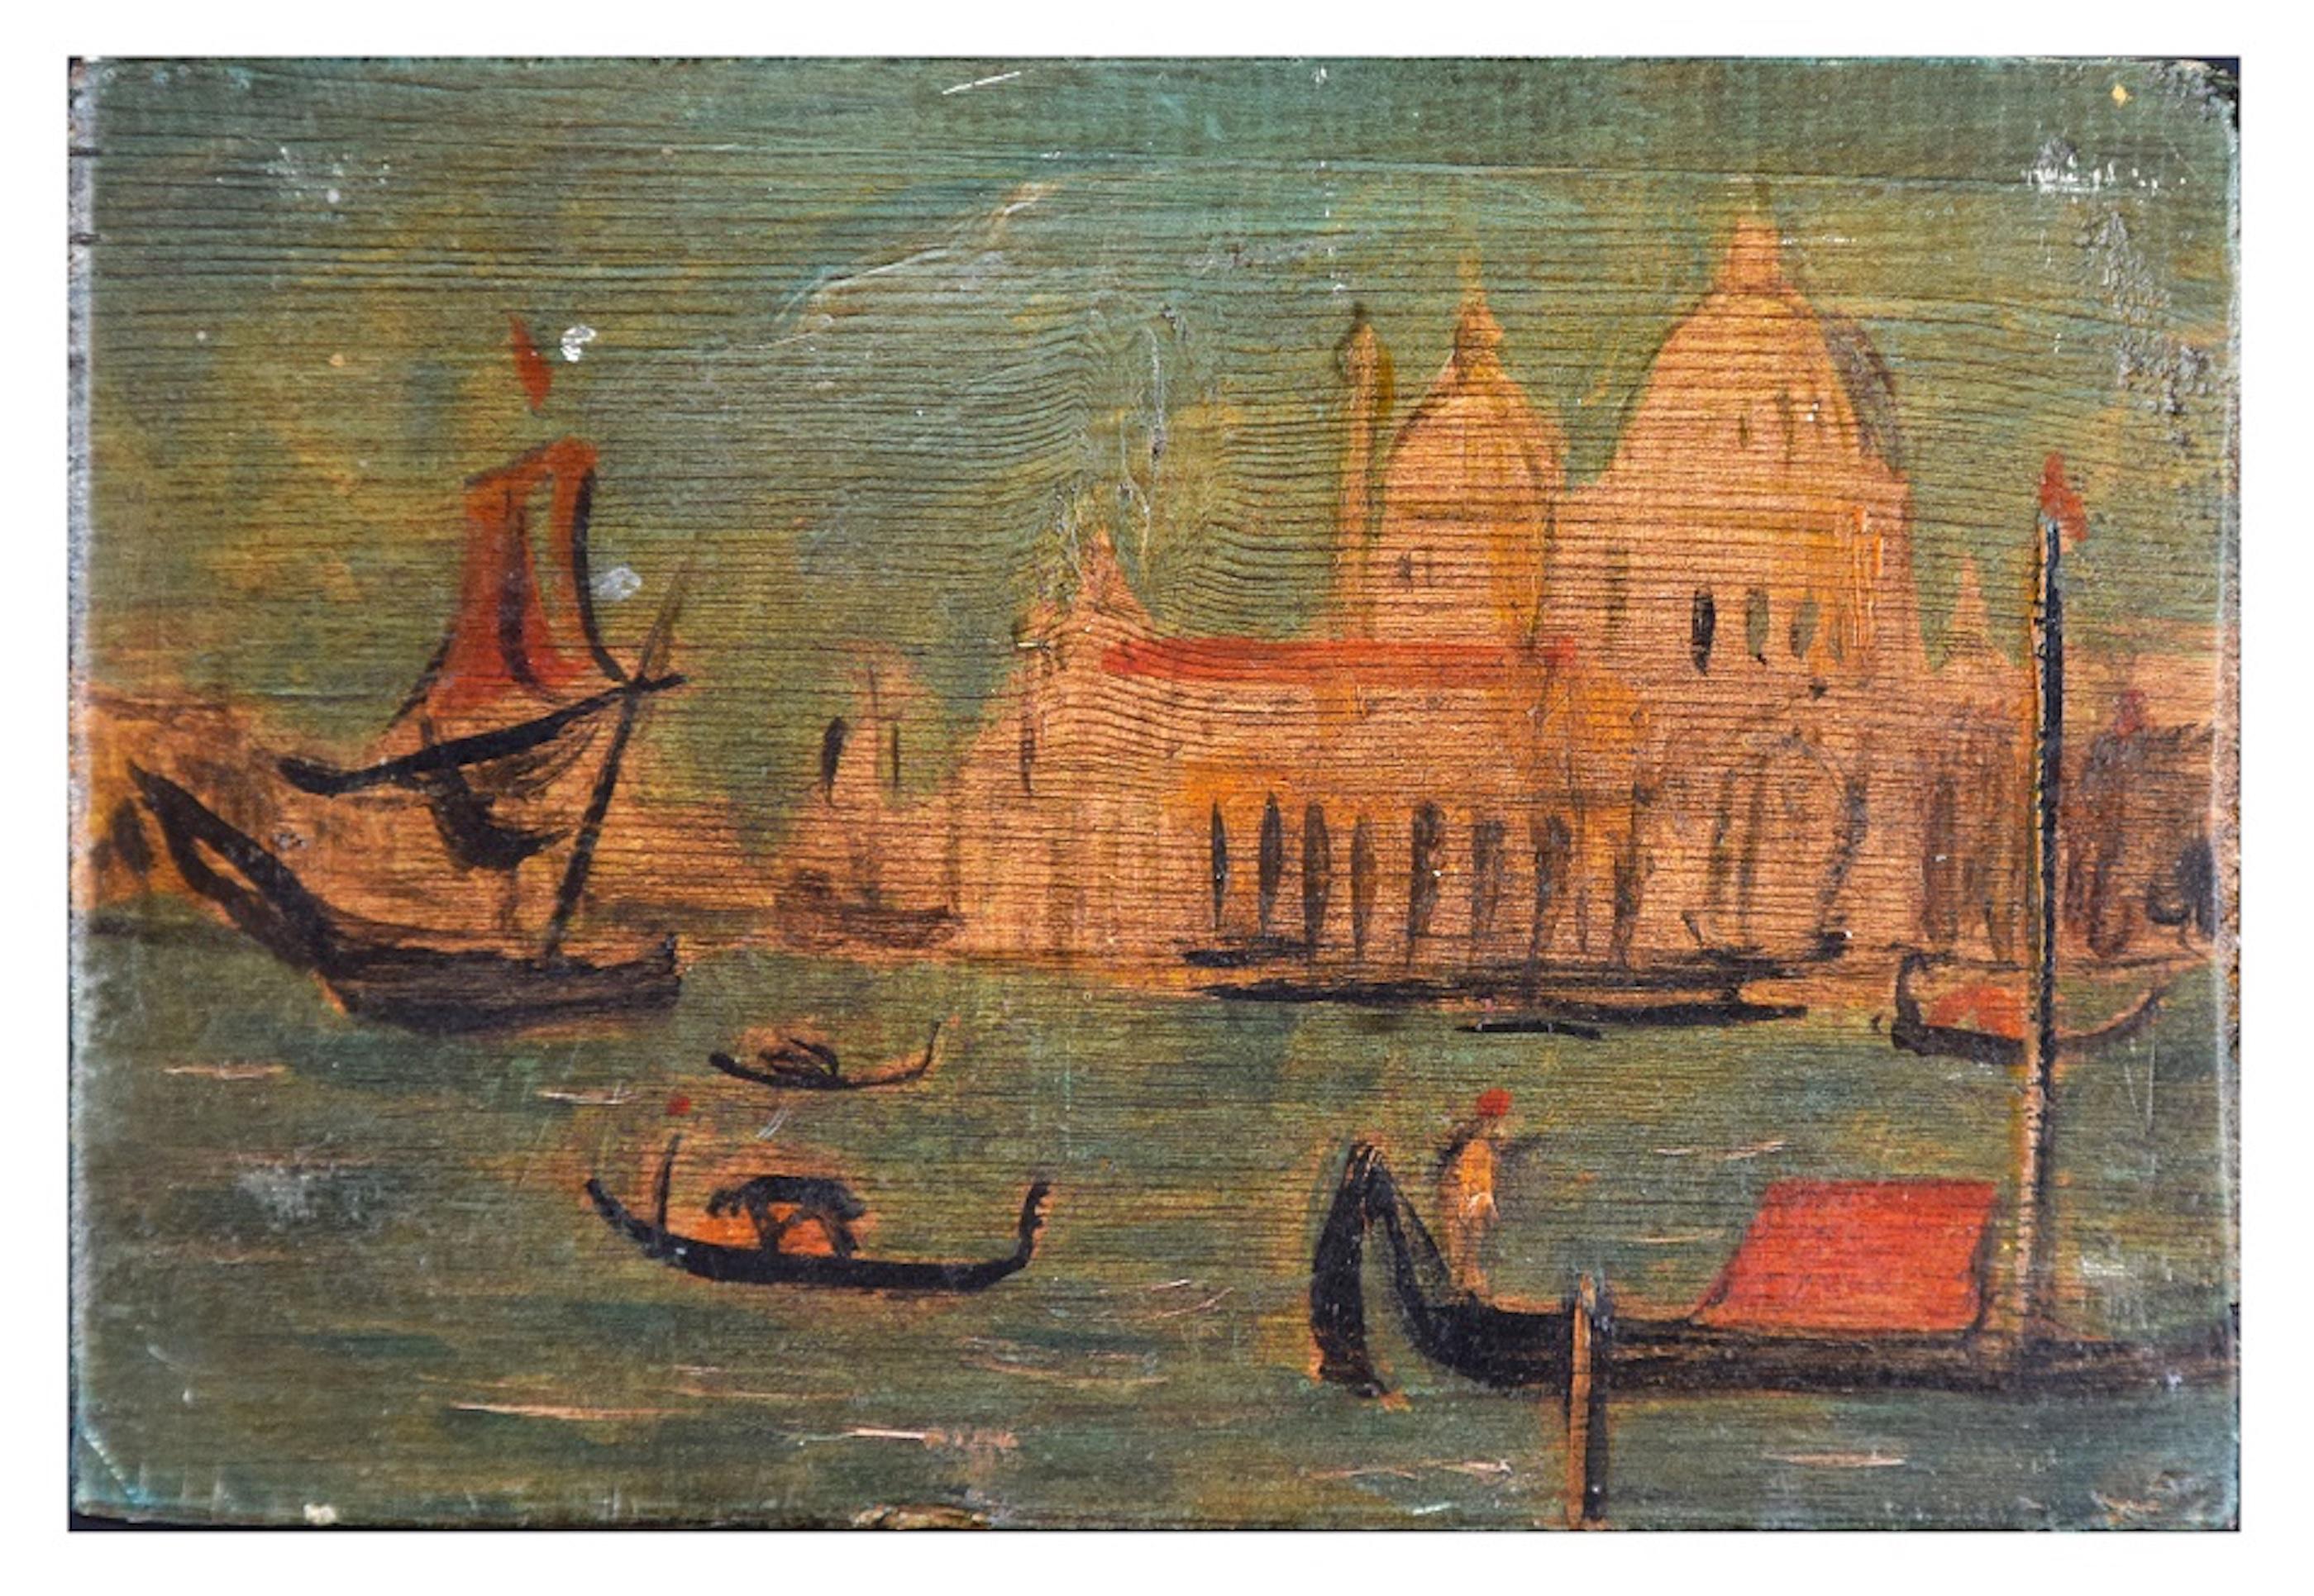 The painting Venezia is a graceful view on the splendid Baroque church of Santa Maria della Salute in Venice seen from the Canal Grande, painted on a rectangular wooden panel by Hans Gill.

On the canal, there are some gondolas and boats. The state